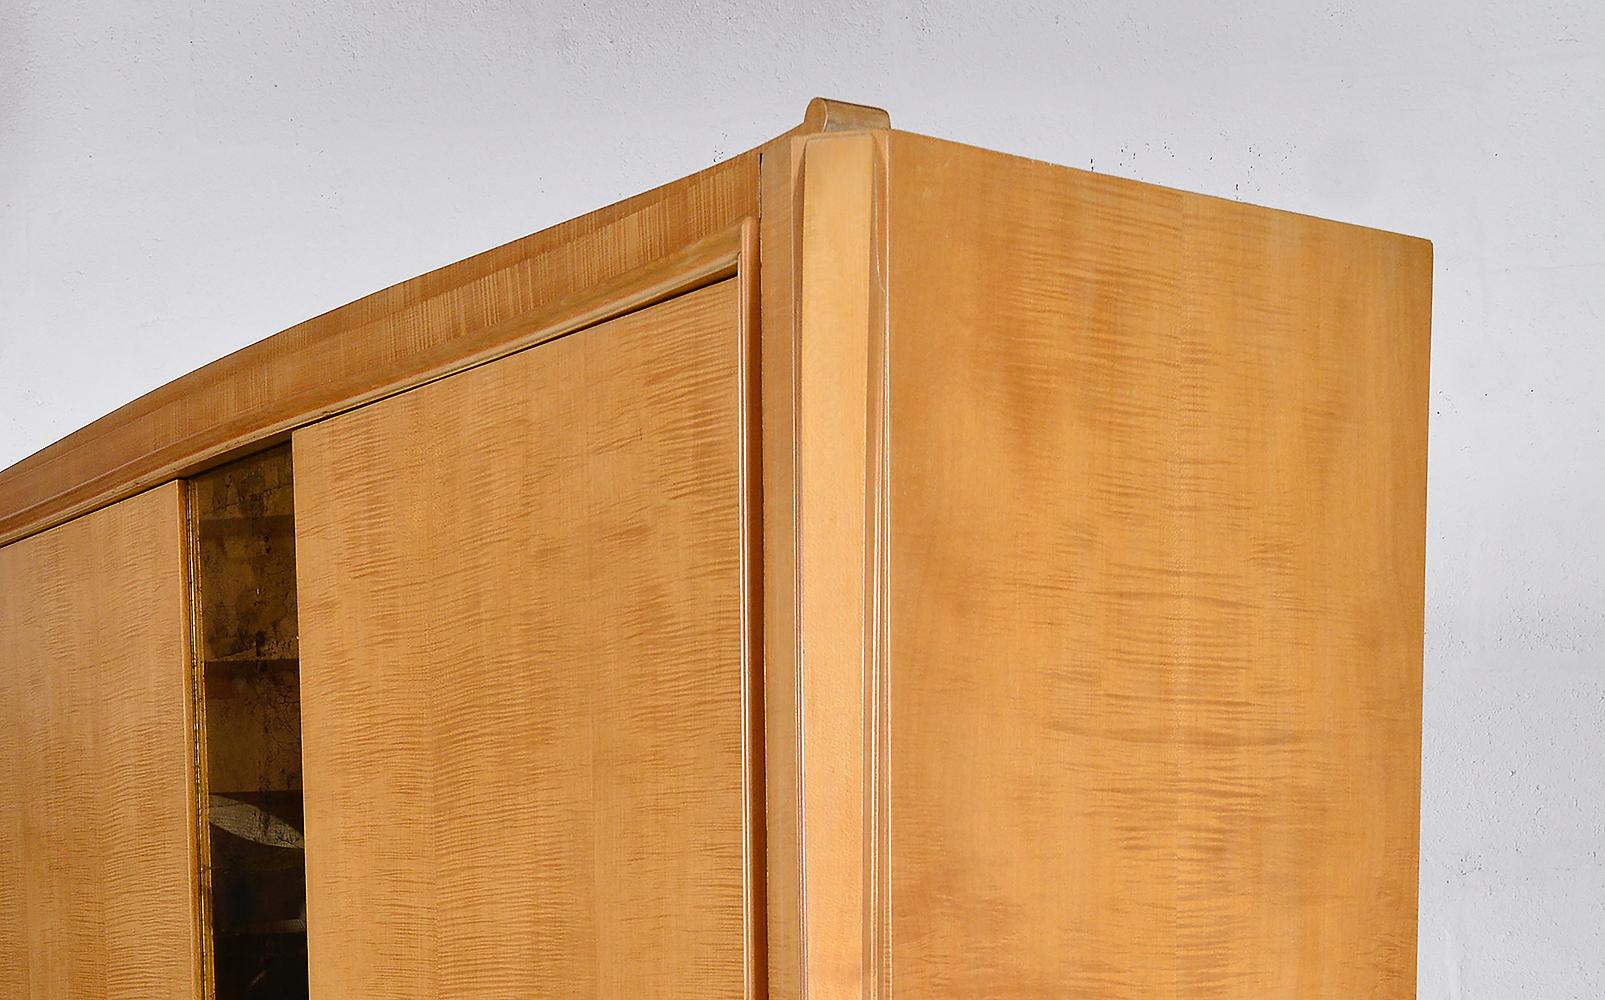 French Editions AV Burr Maple Wardrobe with Mirror Panel, 1940's For Sale 12